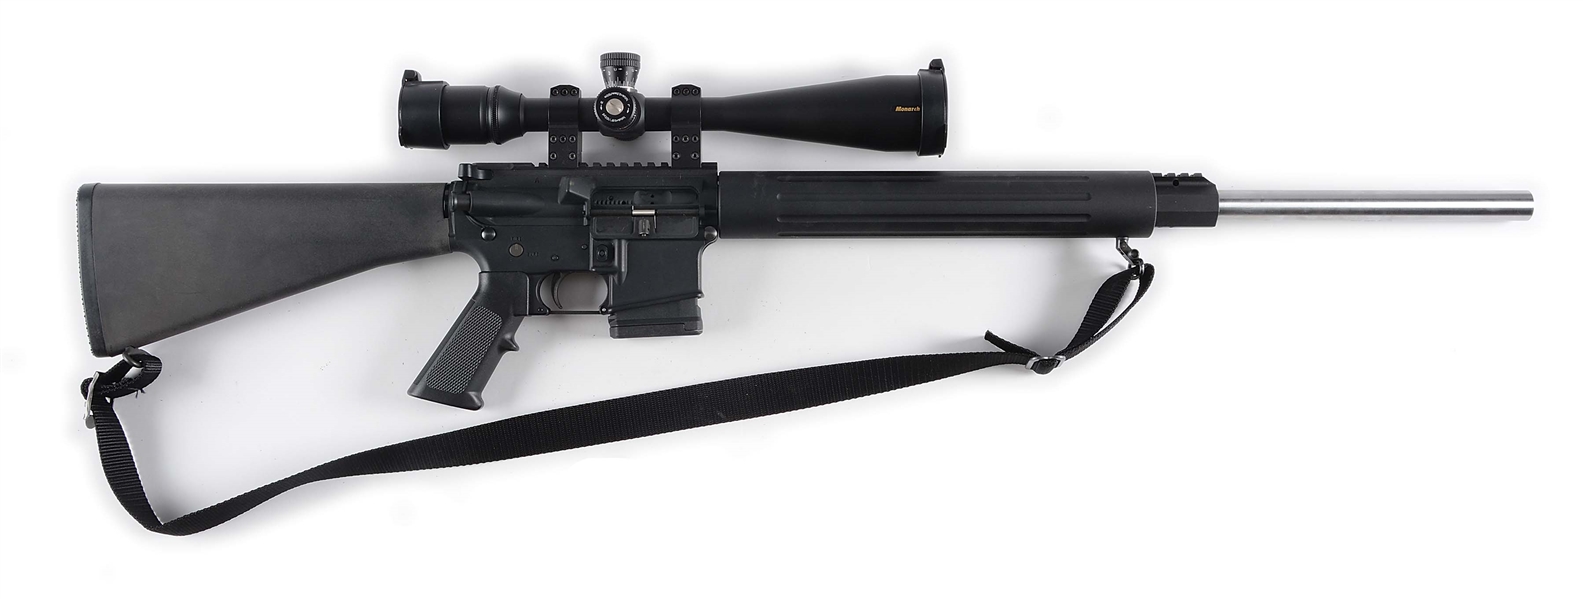 (M) DPMS PANTHER ARMS BULL 24 SEMI-AUTOMATIC RIFLE WITH NIKON MONARCH.